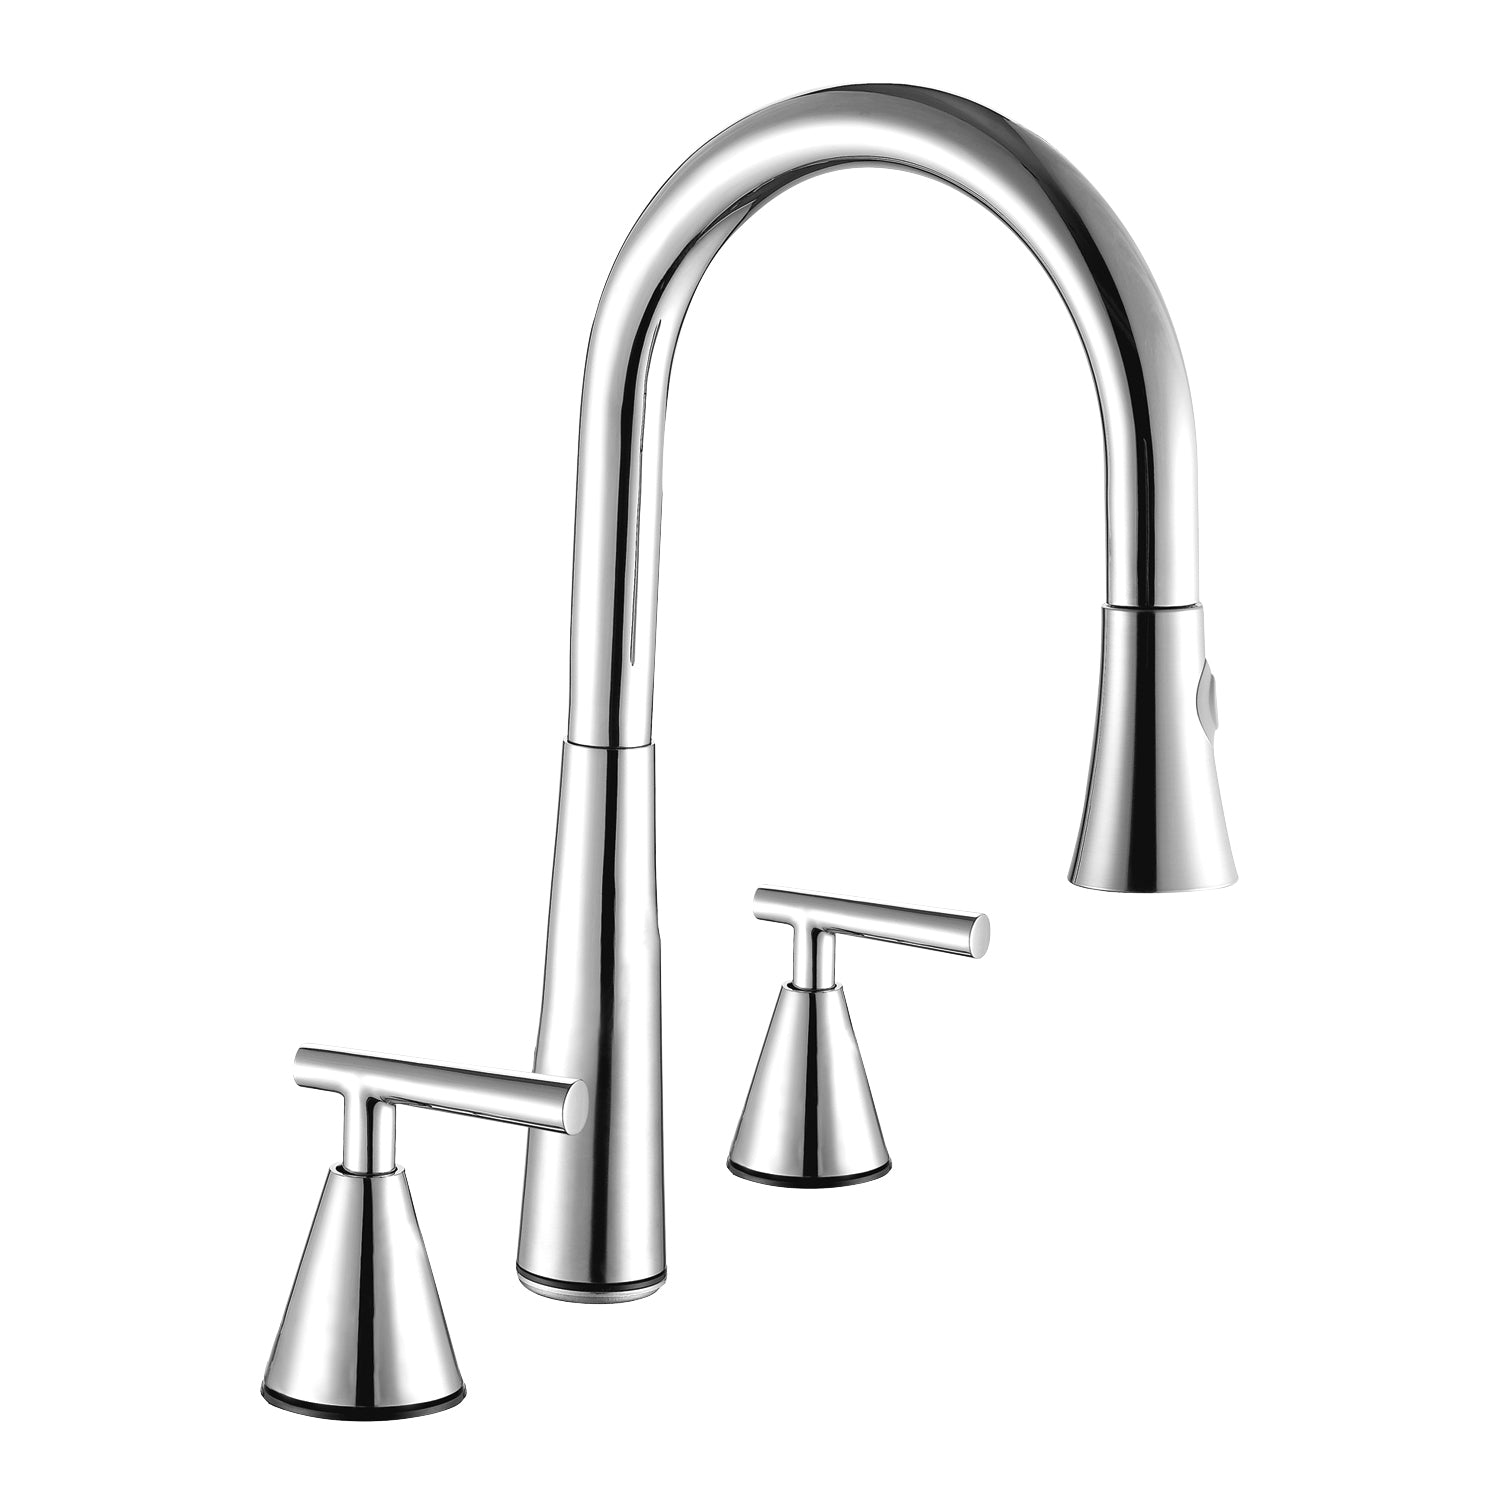 DAX Double Handle Pull Down Kitchen Faucet, Stainless Steel Body, Brushed Finish, Size 8-11/16 x 16-11/16 Inches (DAX-C01302)